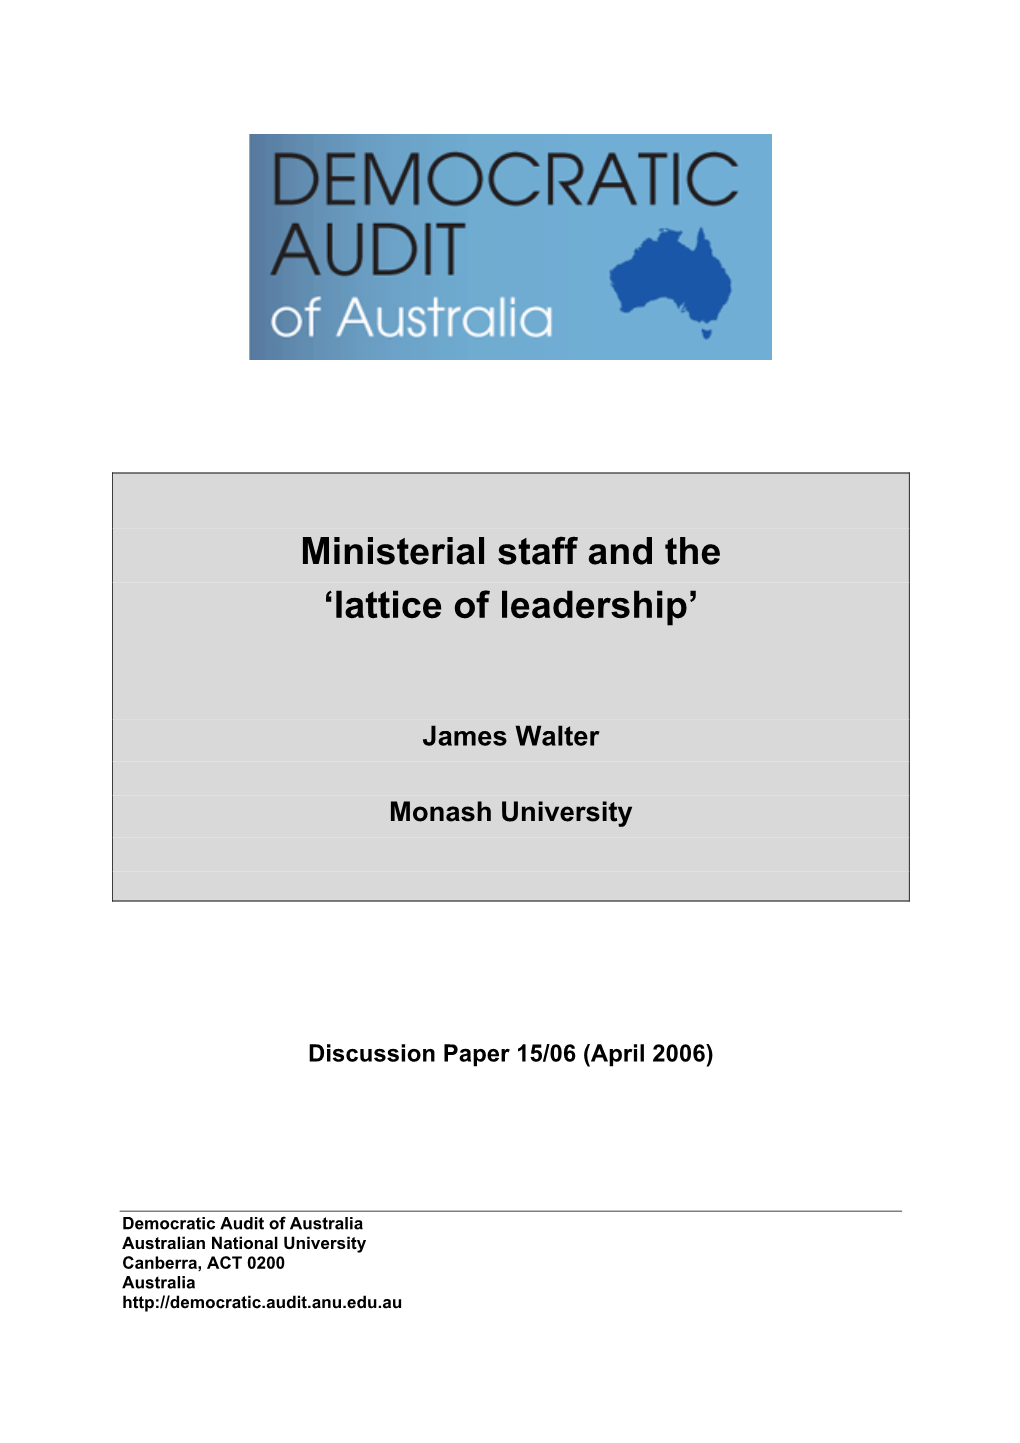 Ministerial Staff and the ‘Lattice of Leadership’